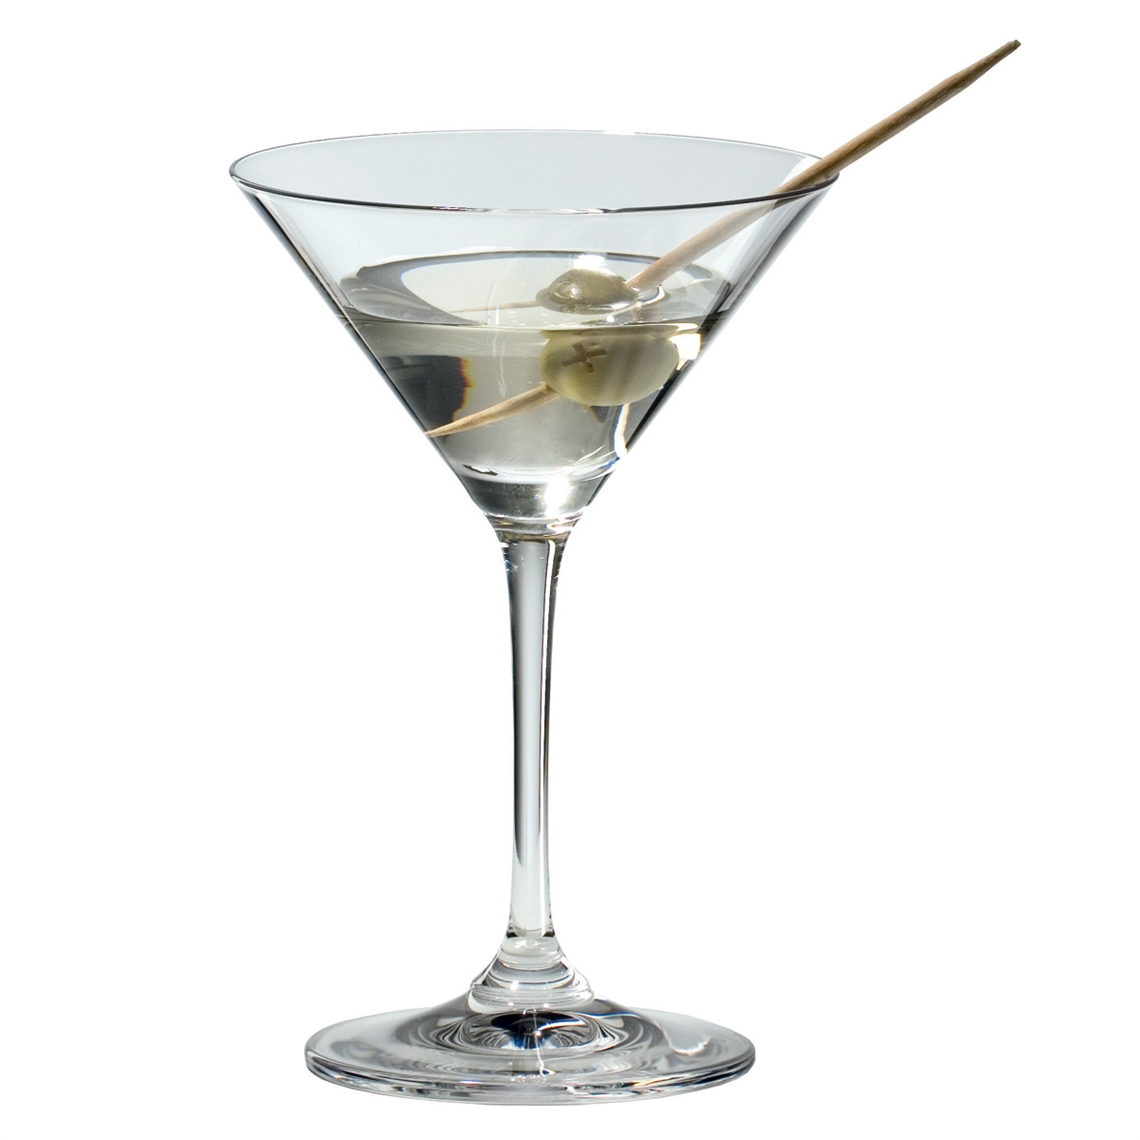 View more starlight from our Martini Glasses range